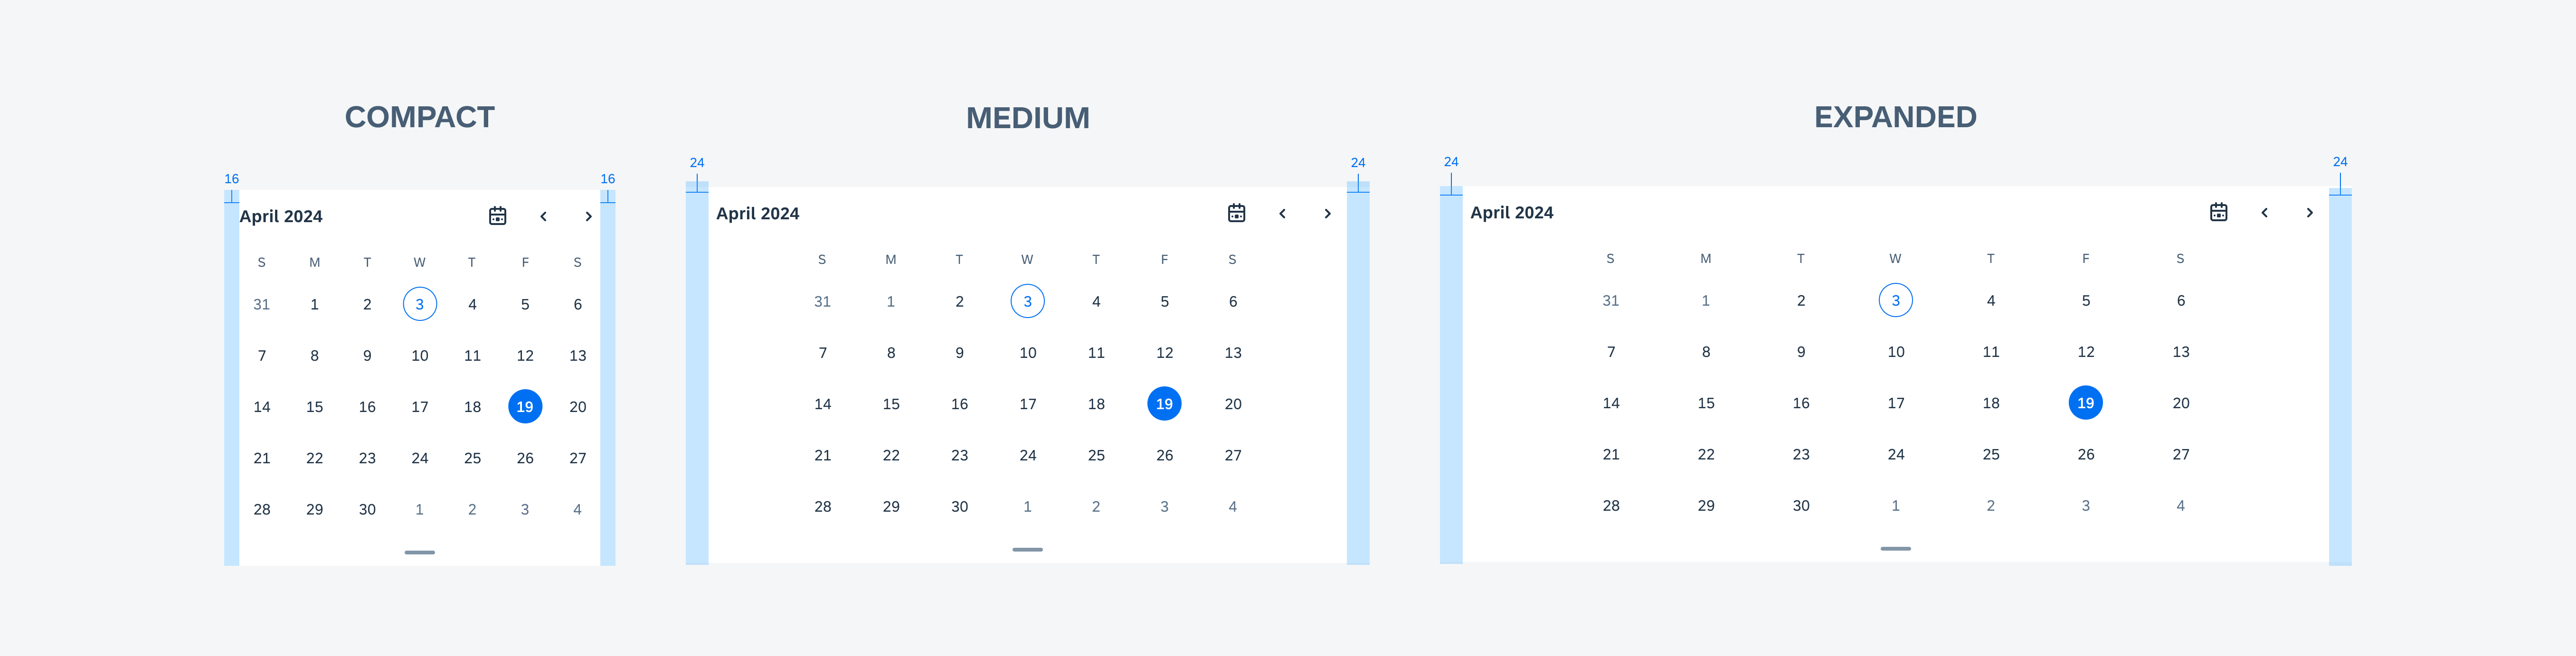 Window size classes based on width: calendar in compact (left), medium (middle), and expanded (right) size classes